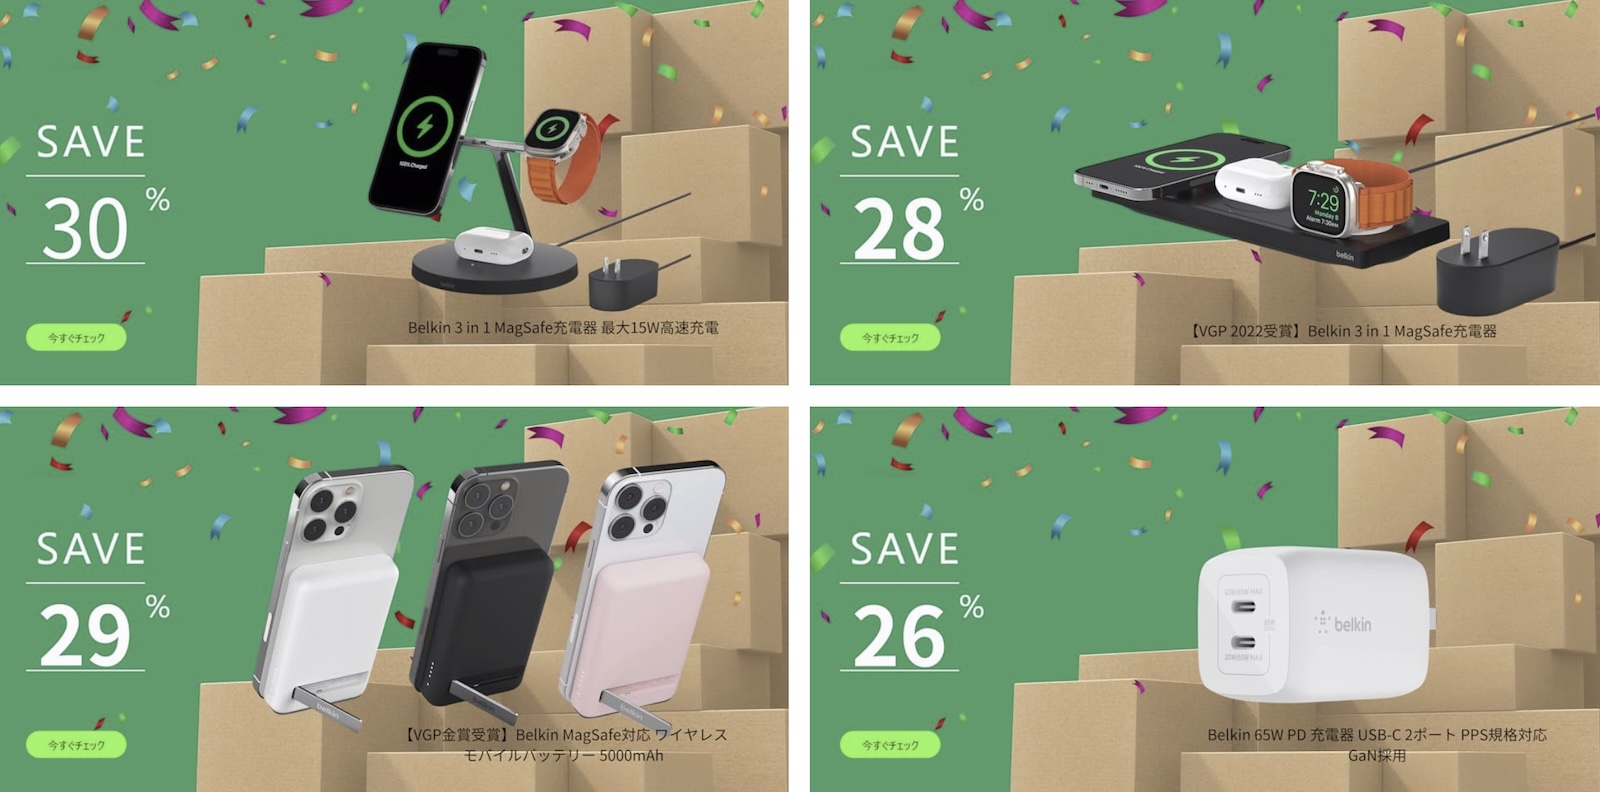 Belkin Devices are already on sale